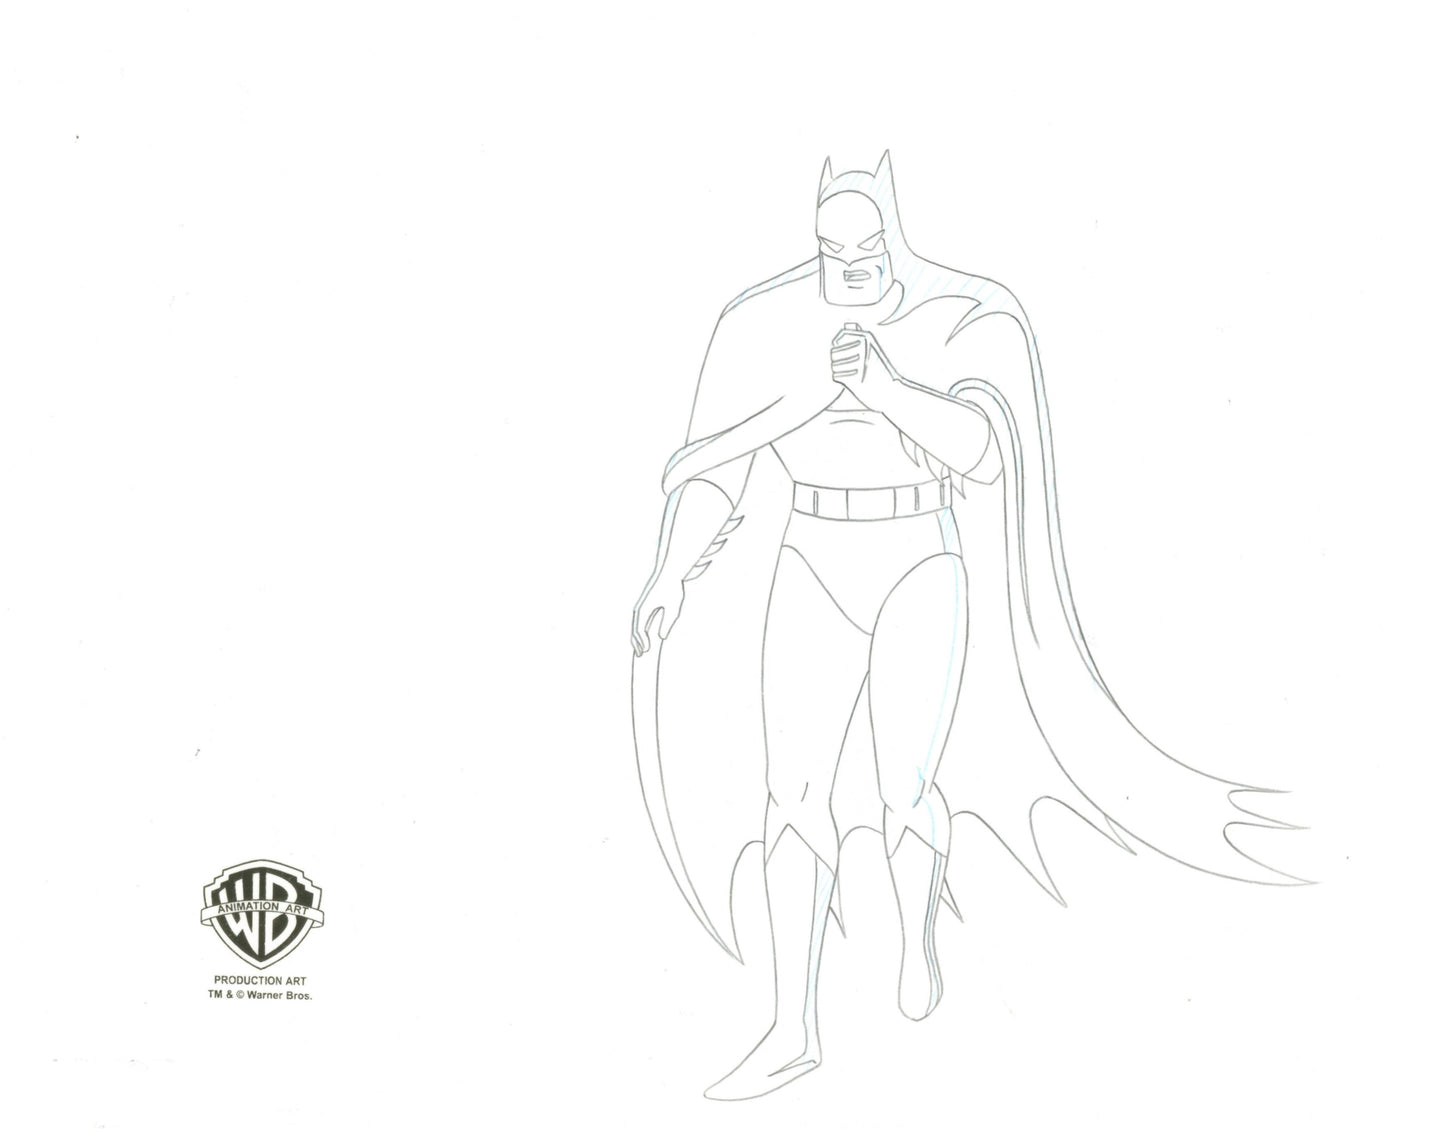 Batman The Animated Series Original Production Cel Signed by Kevin Altieri with Matching Drawing: Batman